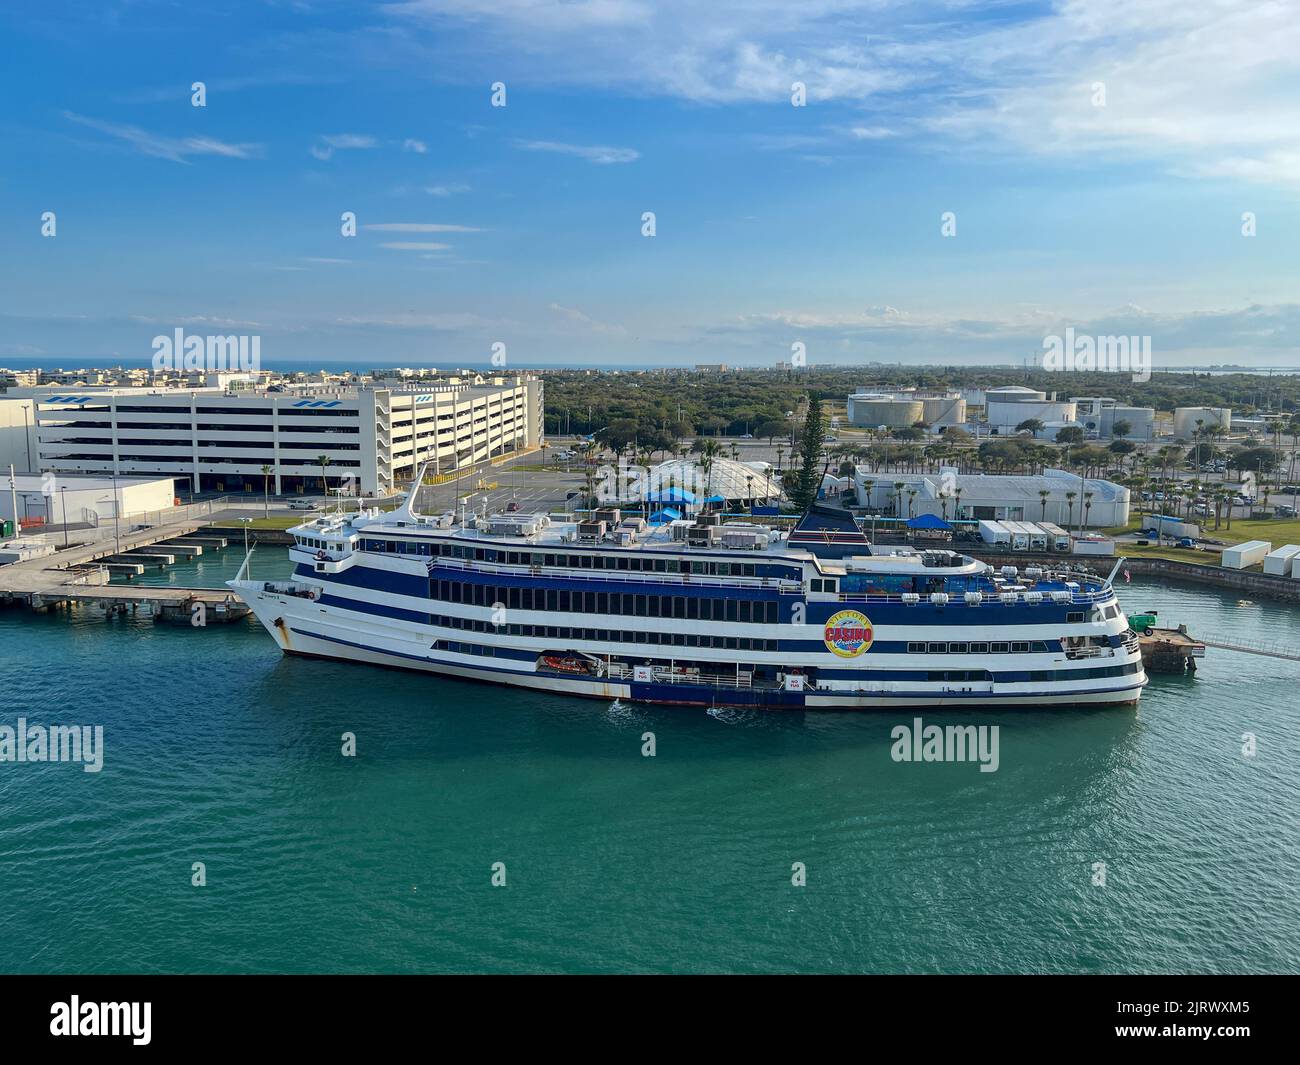 Orlando, FL USA - February 12, 2022: An aerial view of the Victory Casino ship at Port Canaveral in Florida. Stock Photo